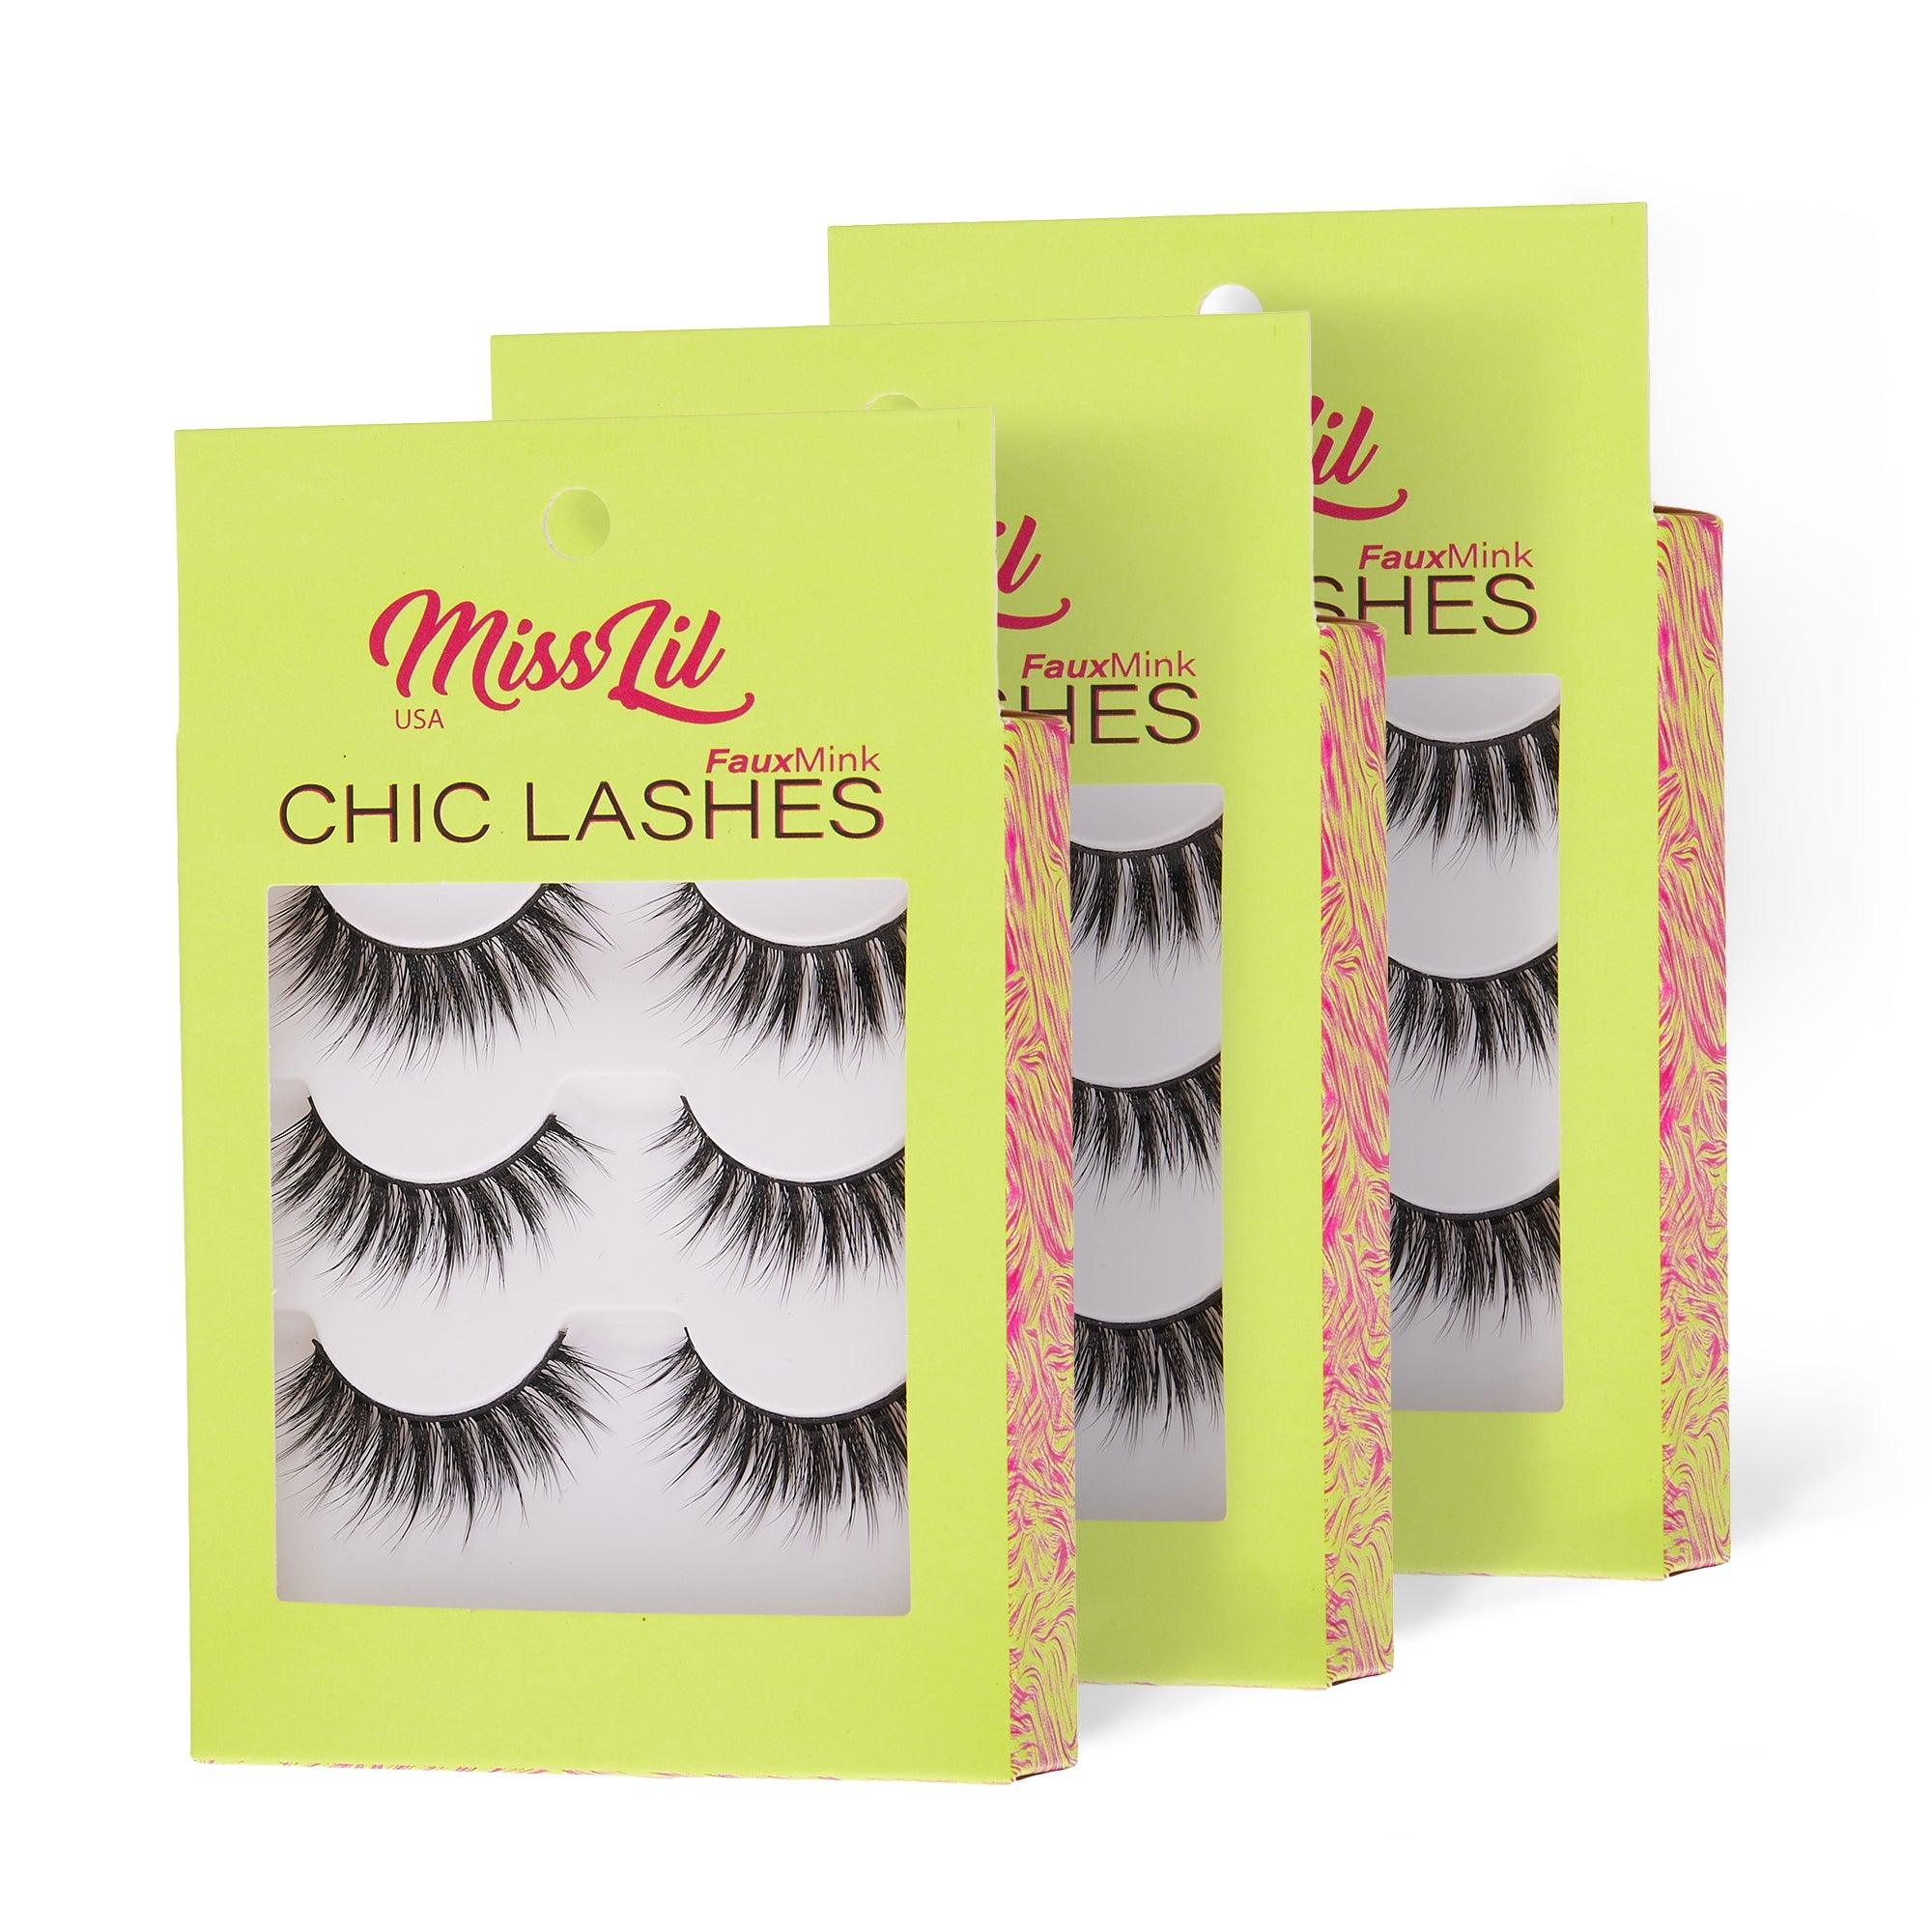 3-Pairs Lashes-Chic Lashes Collection #6 (Pack of 12) - Miss Lil USA Wholesale